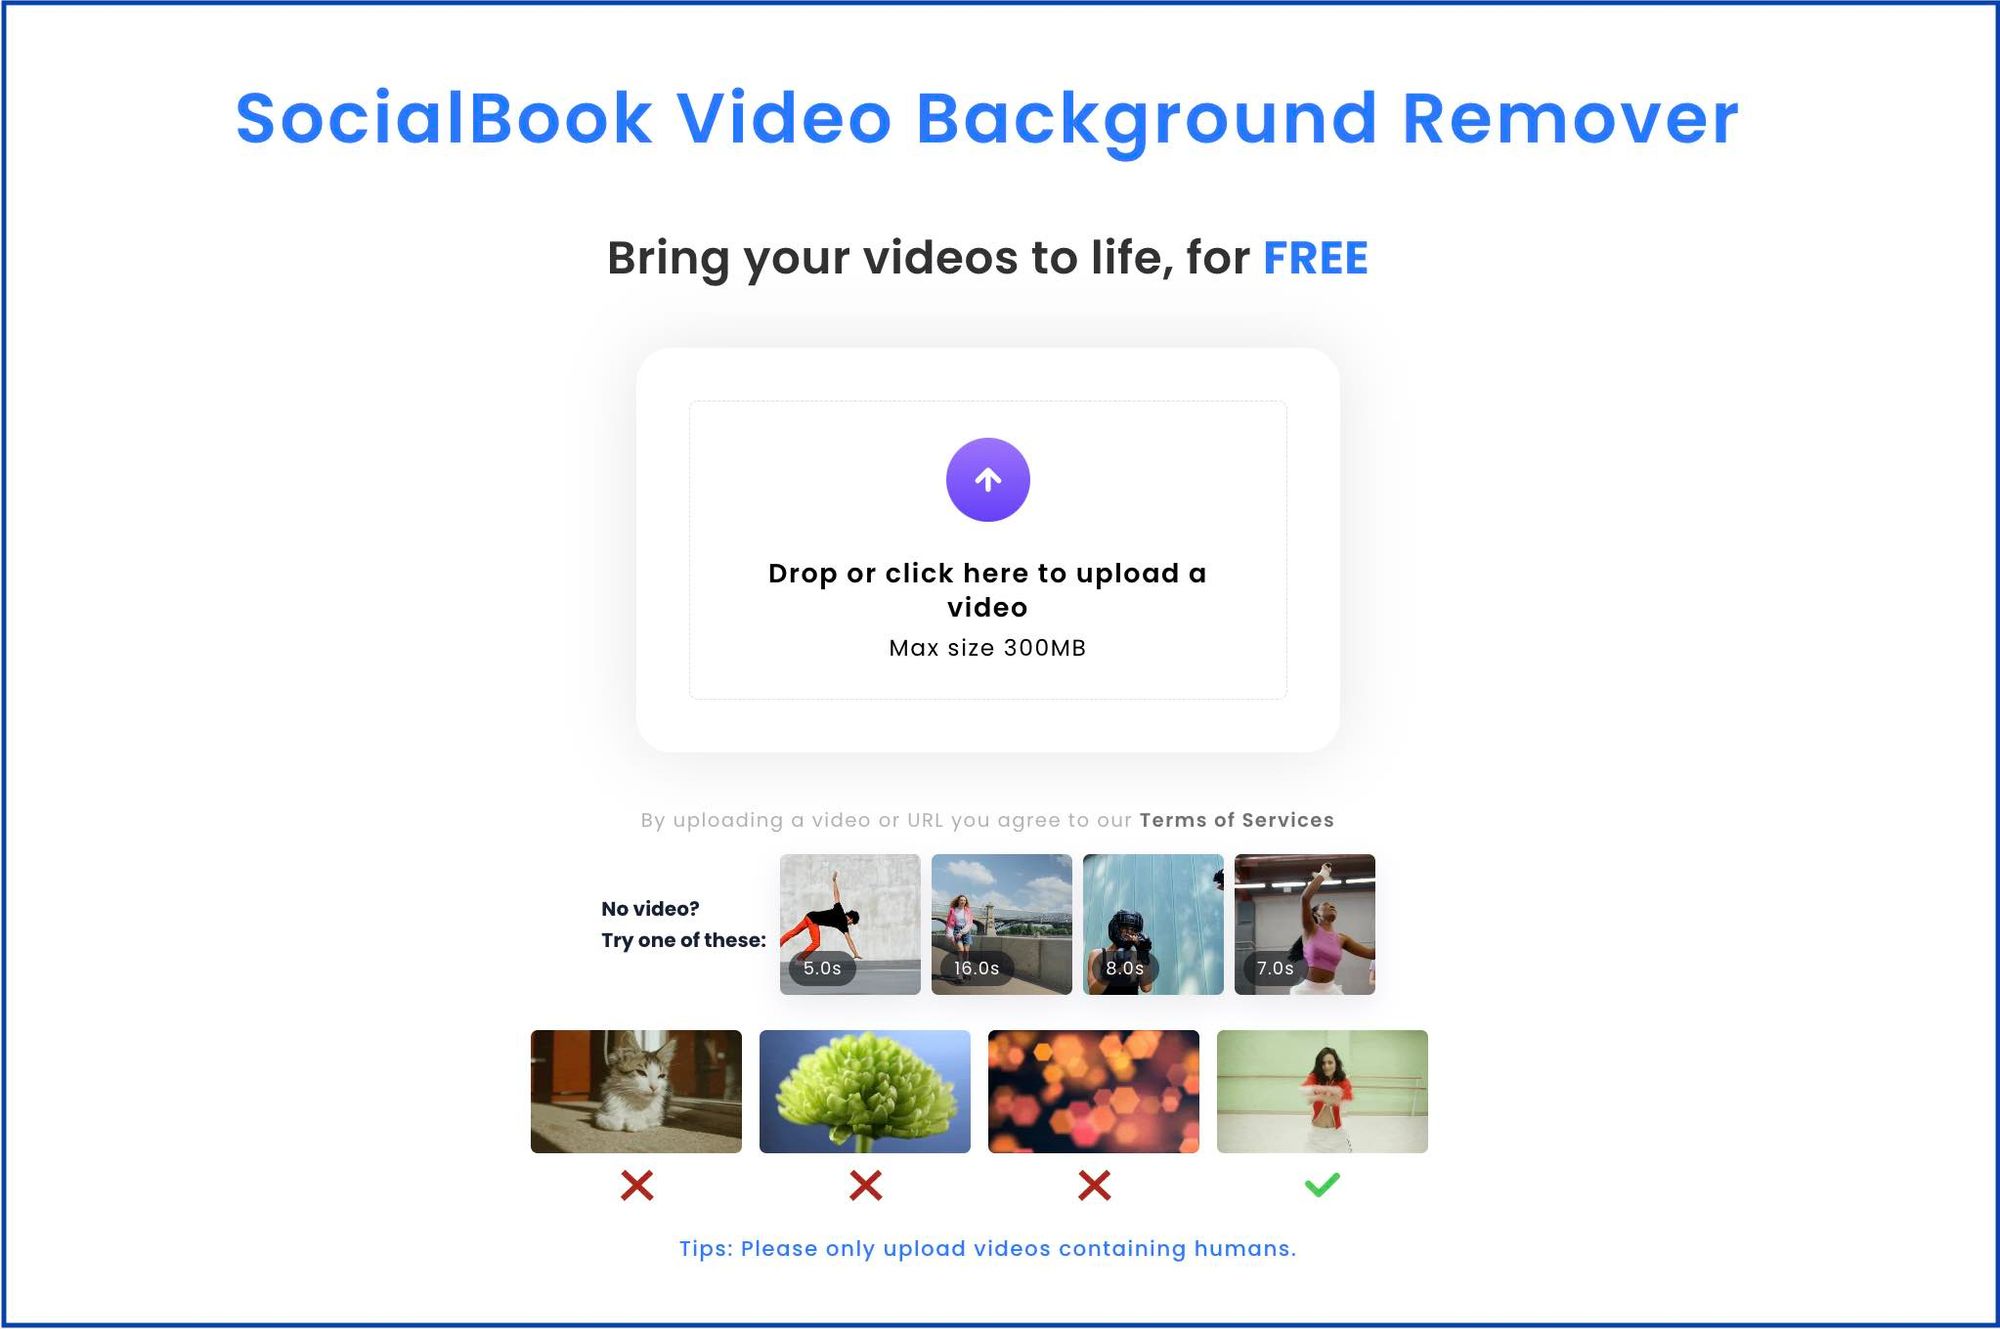 Upload your video to SocialBook Video Background Remover.